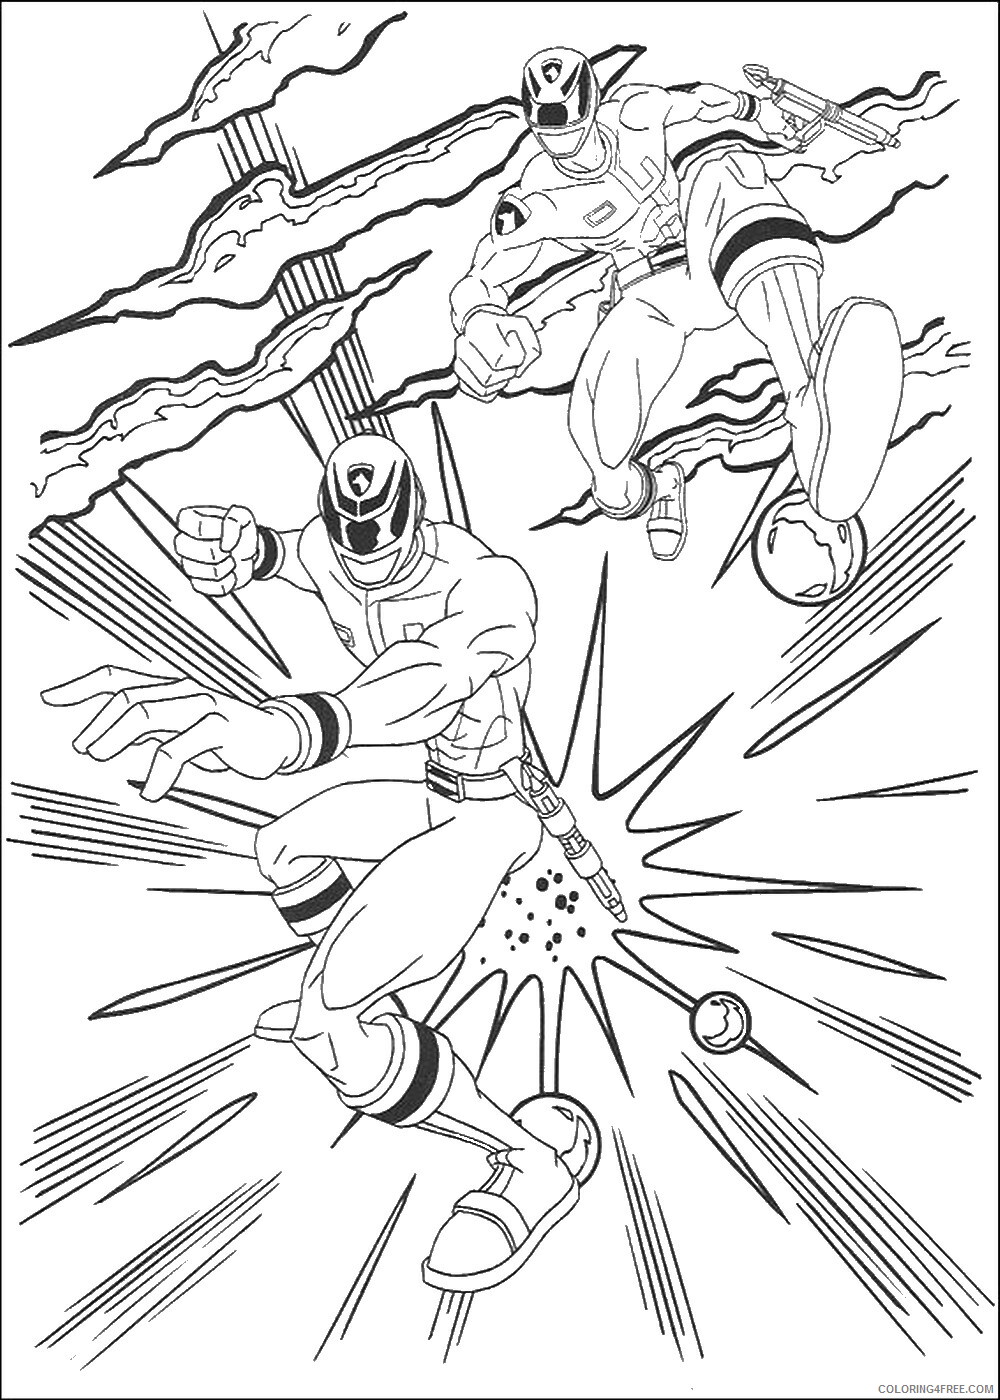 Power Rangers Coloring Pages TV Film power_rangers12 Printable 2020 06699 Coloring4free